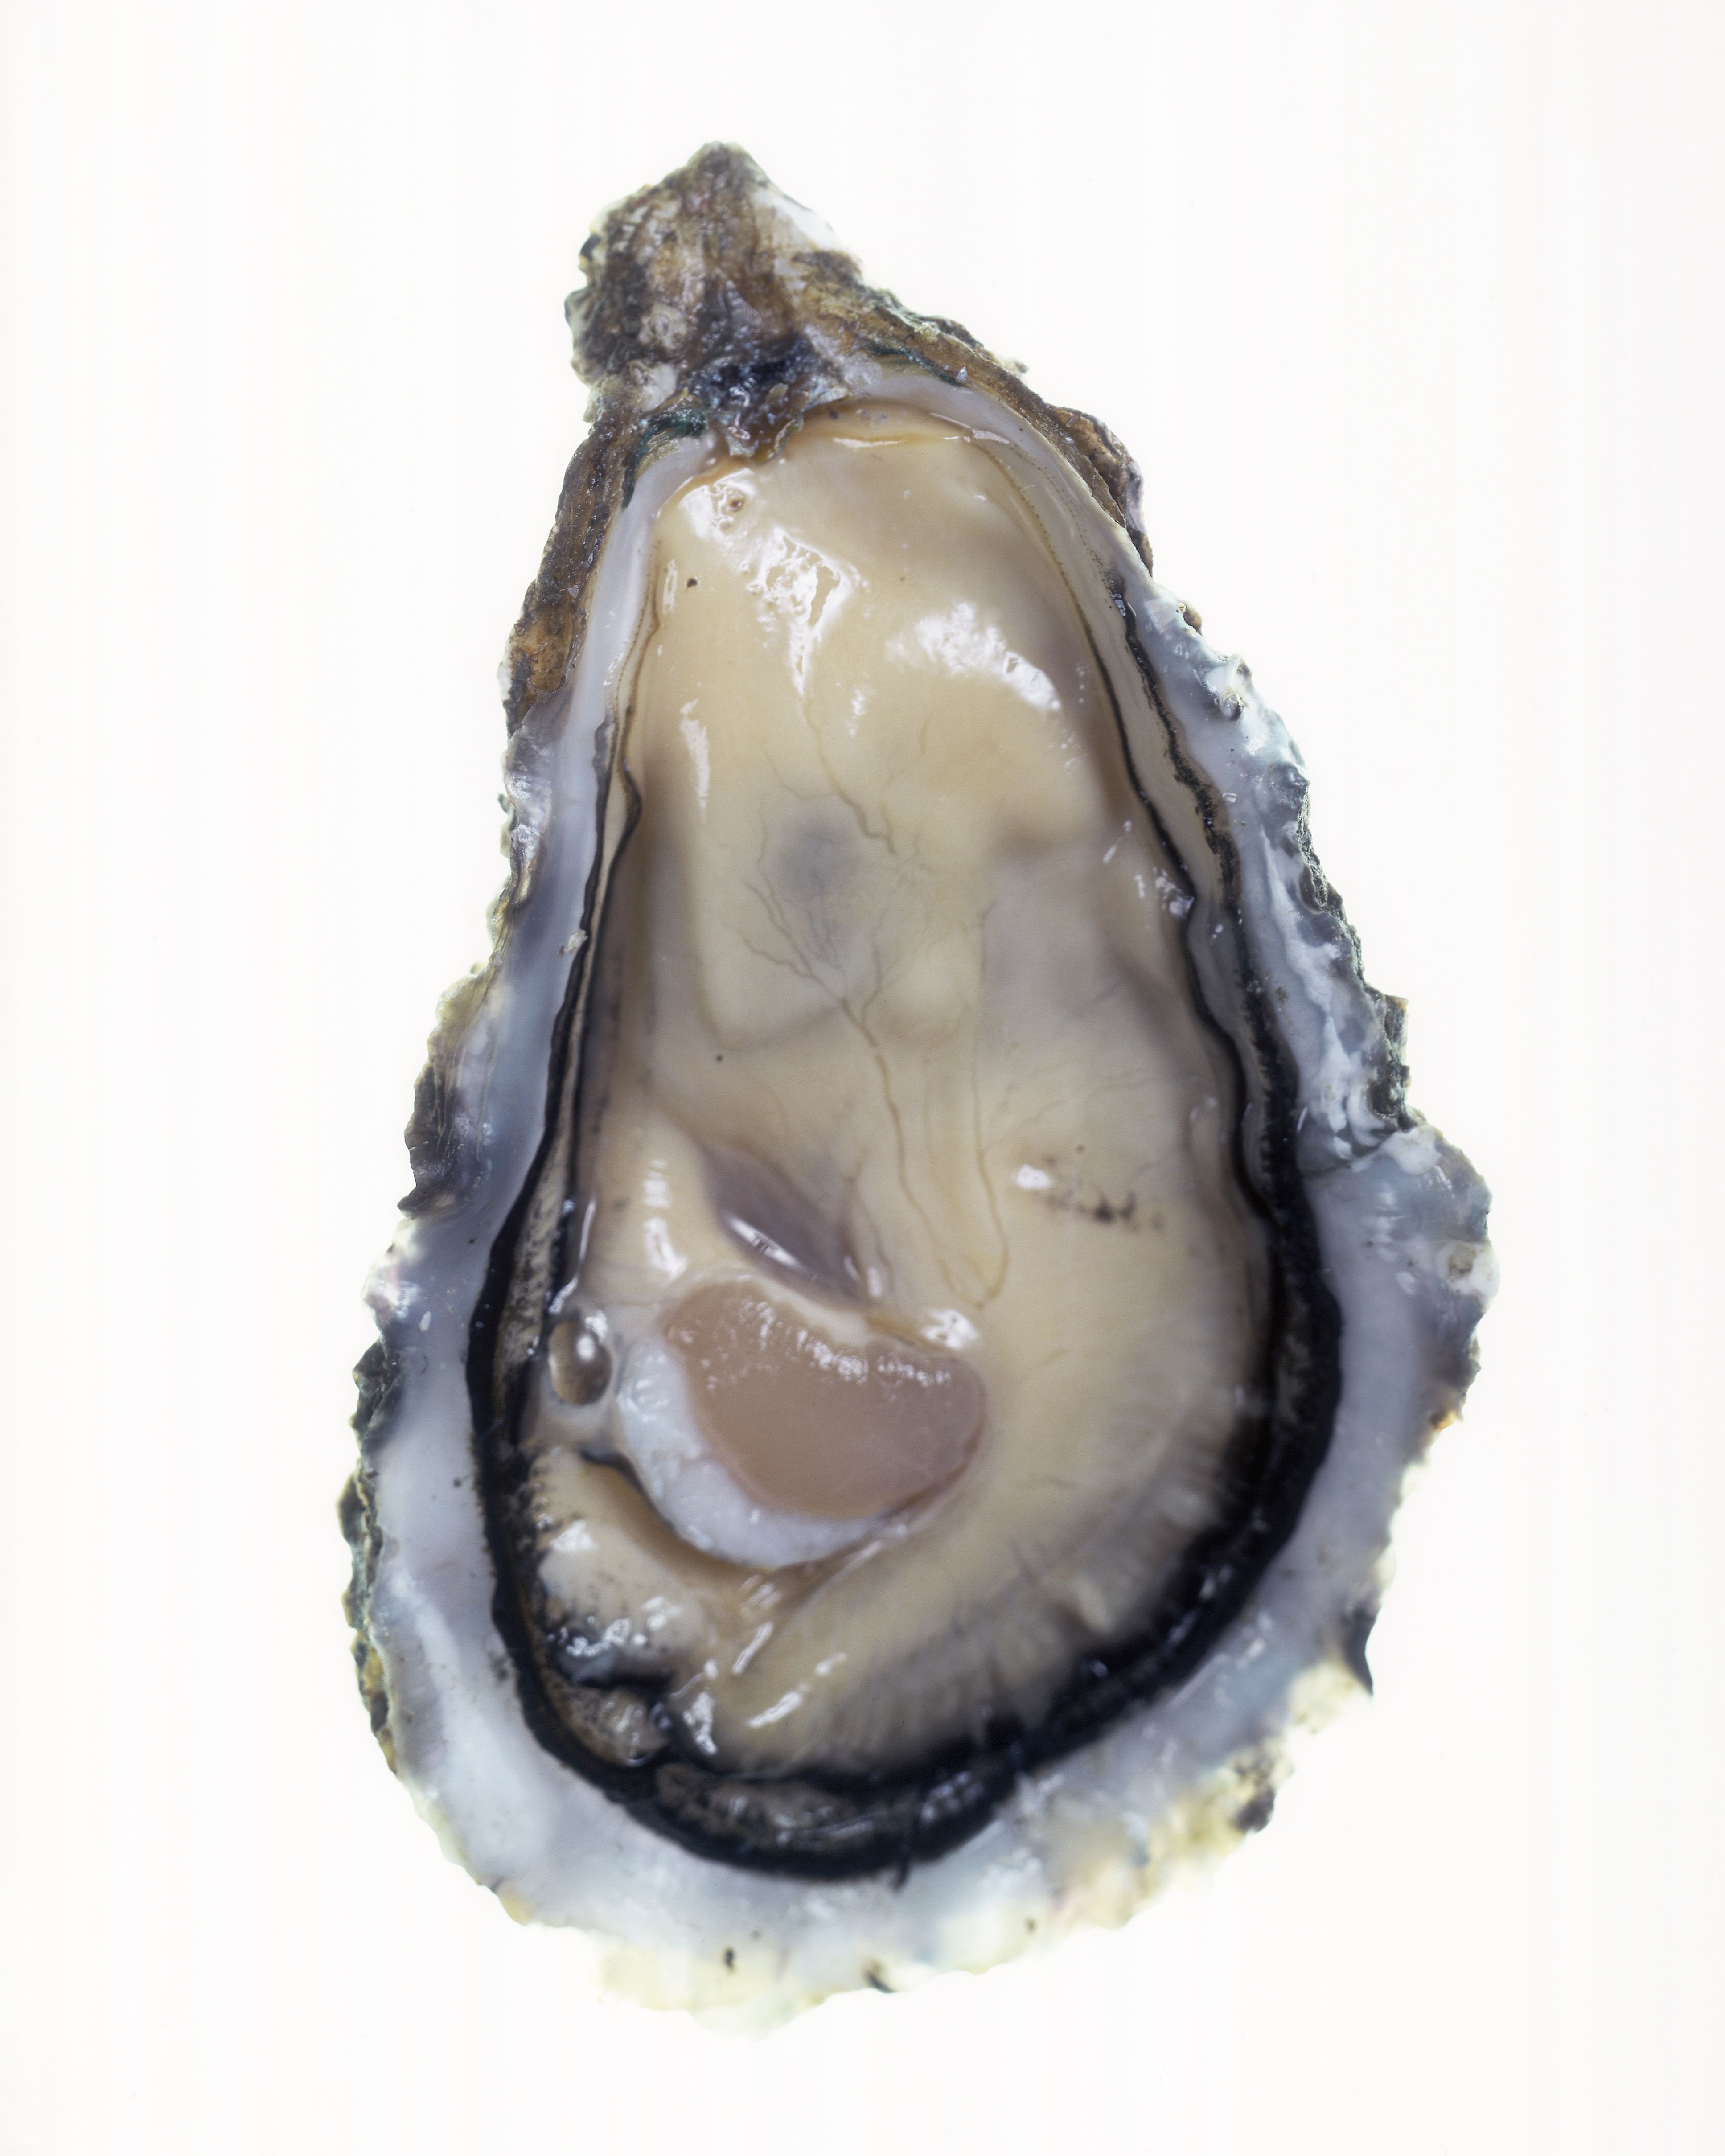 Opened oyster, close up